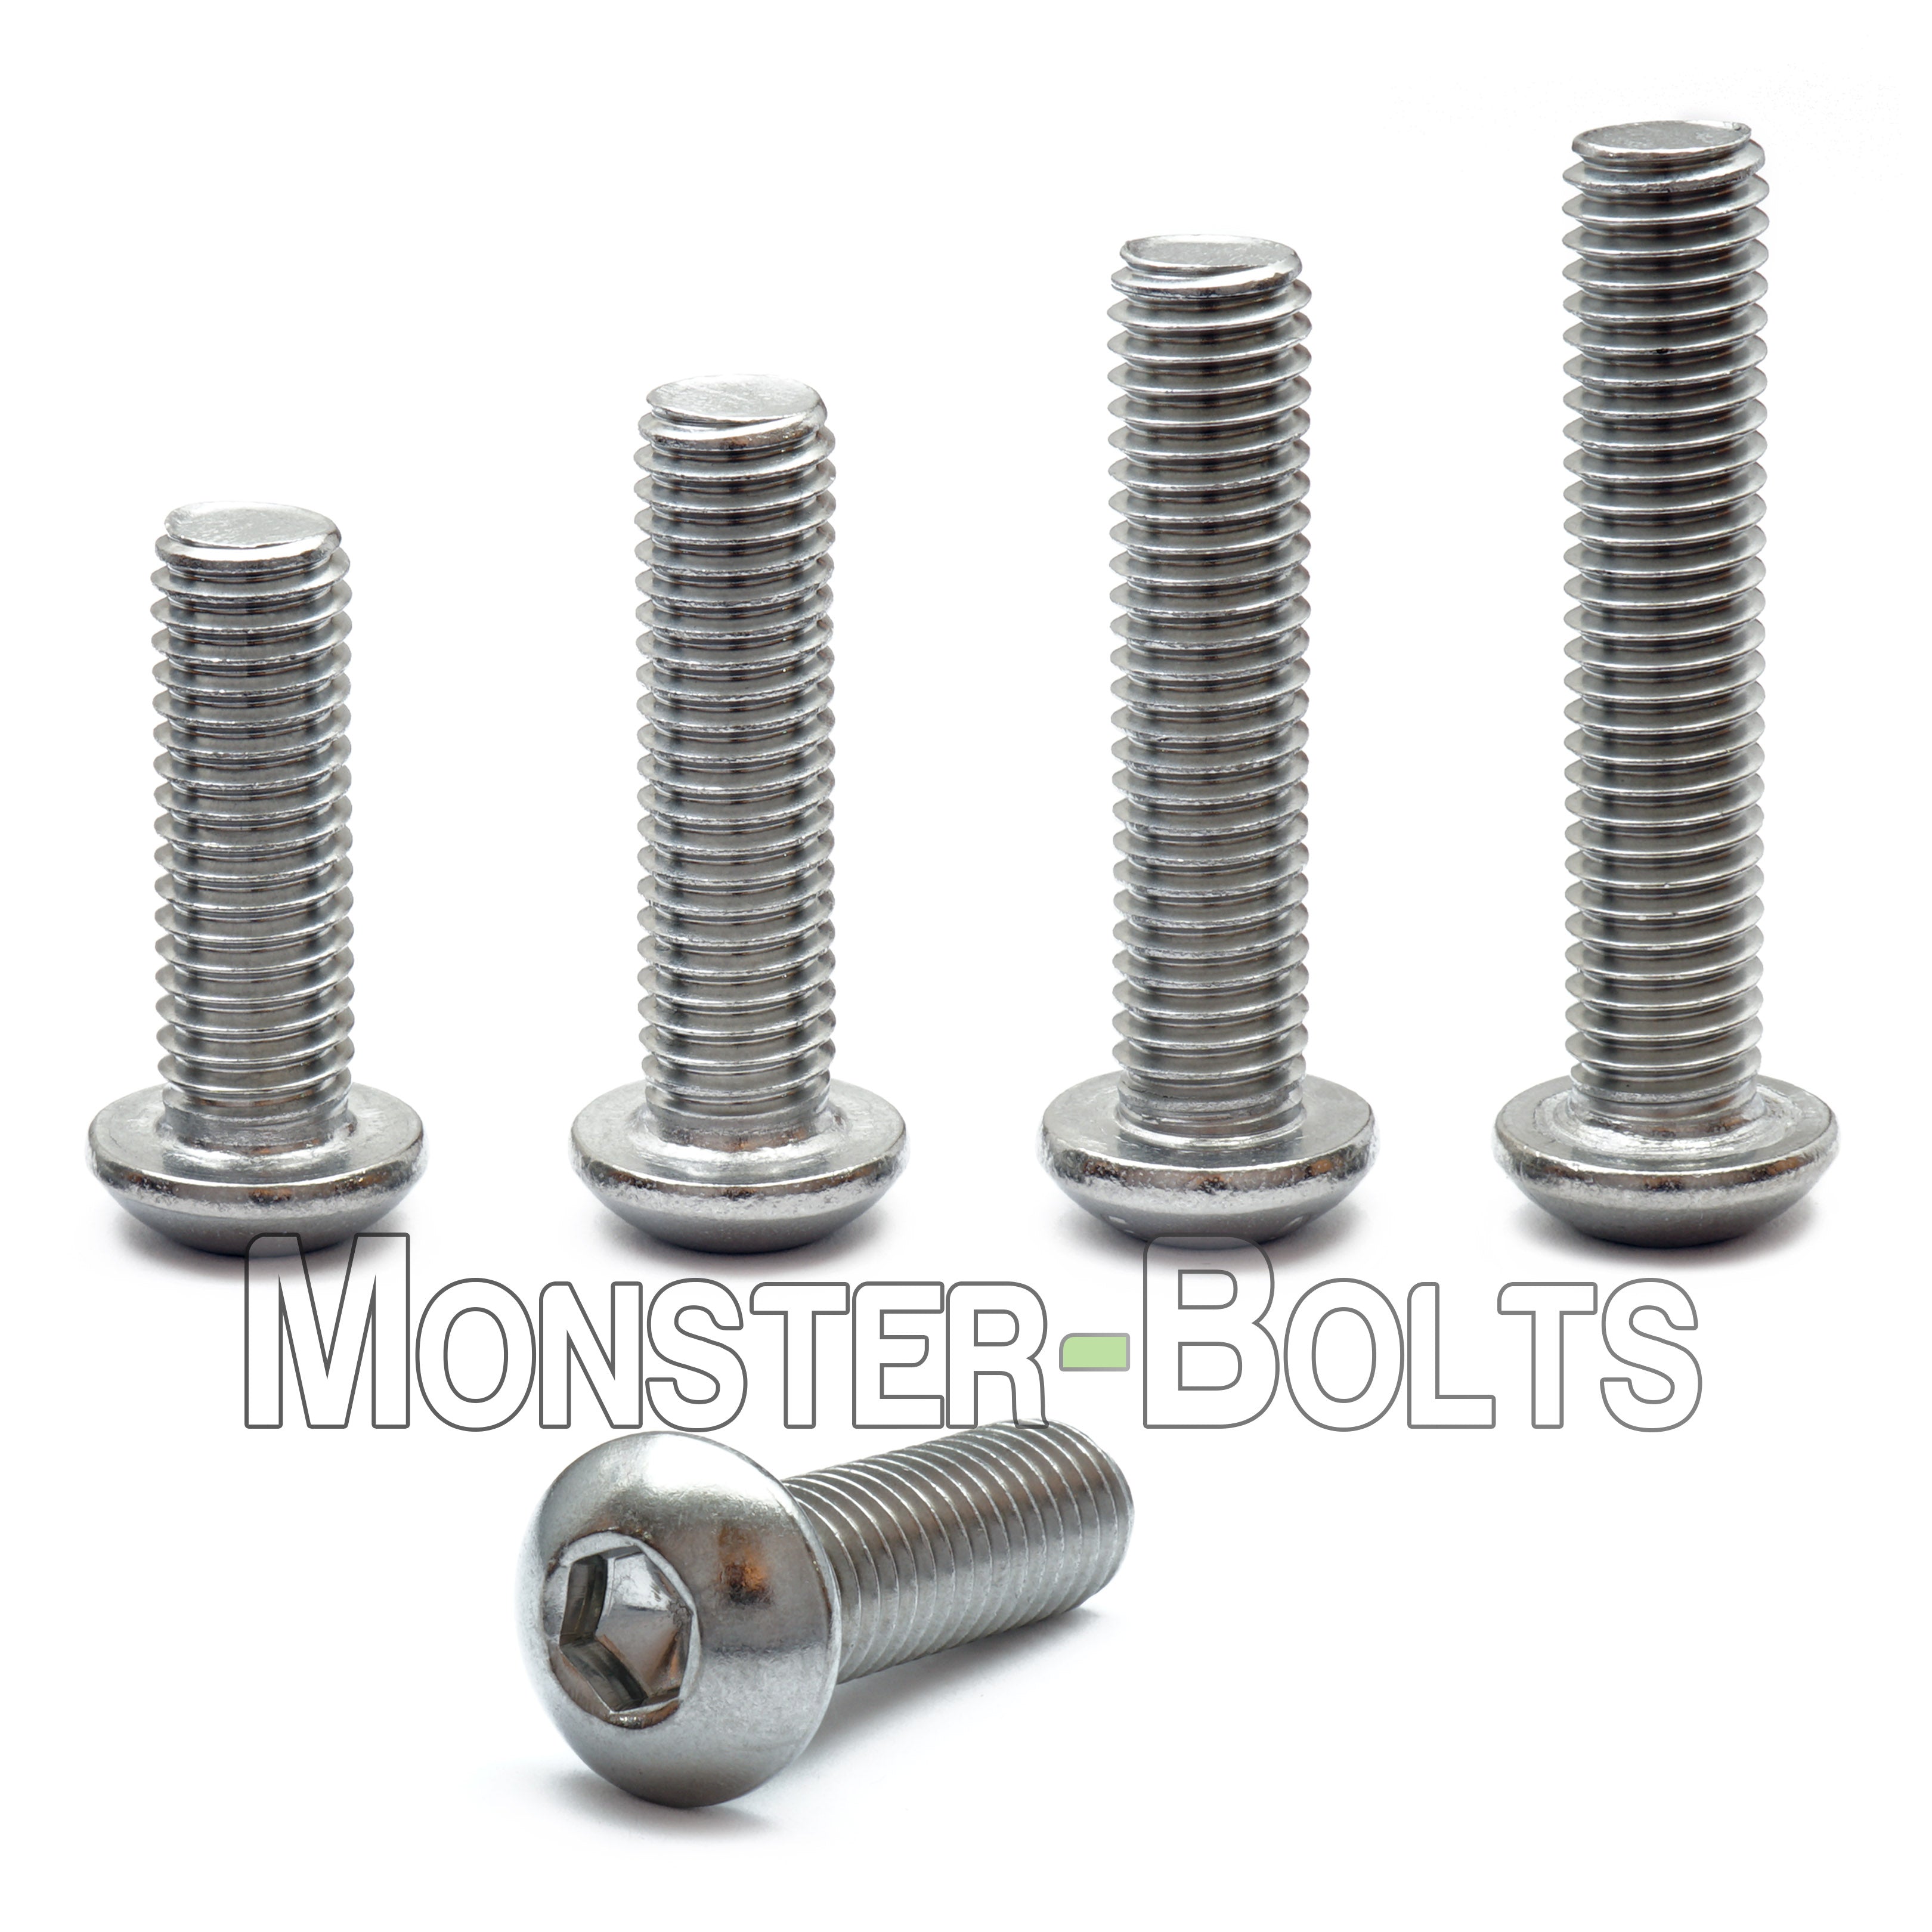 20 M6 x 30mm A2 STAINLESS SOCKET BUTTON HEAD SCREW BOLTS PLUS NUTS & WASHERS 